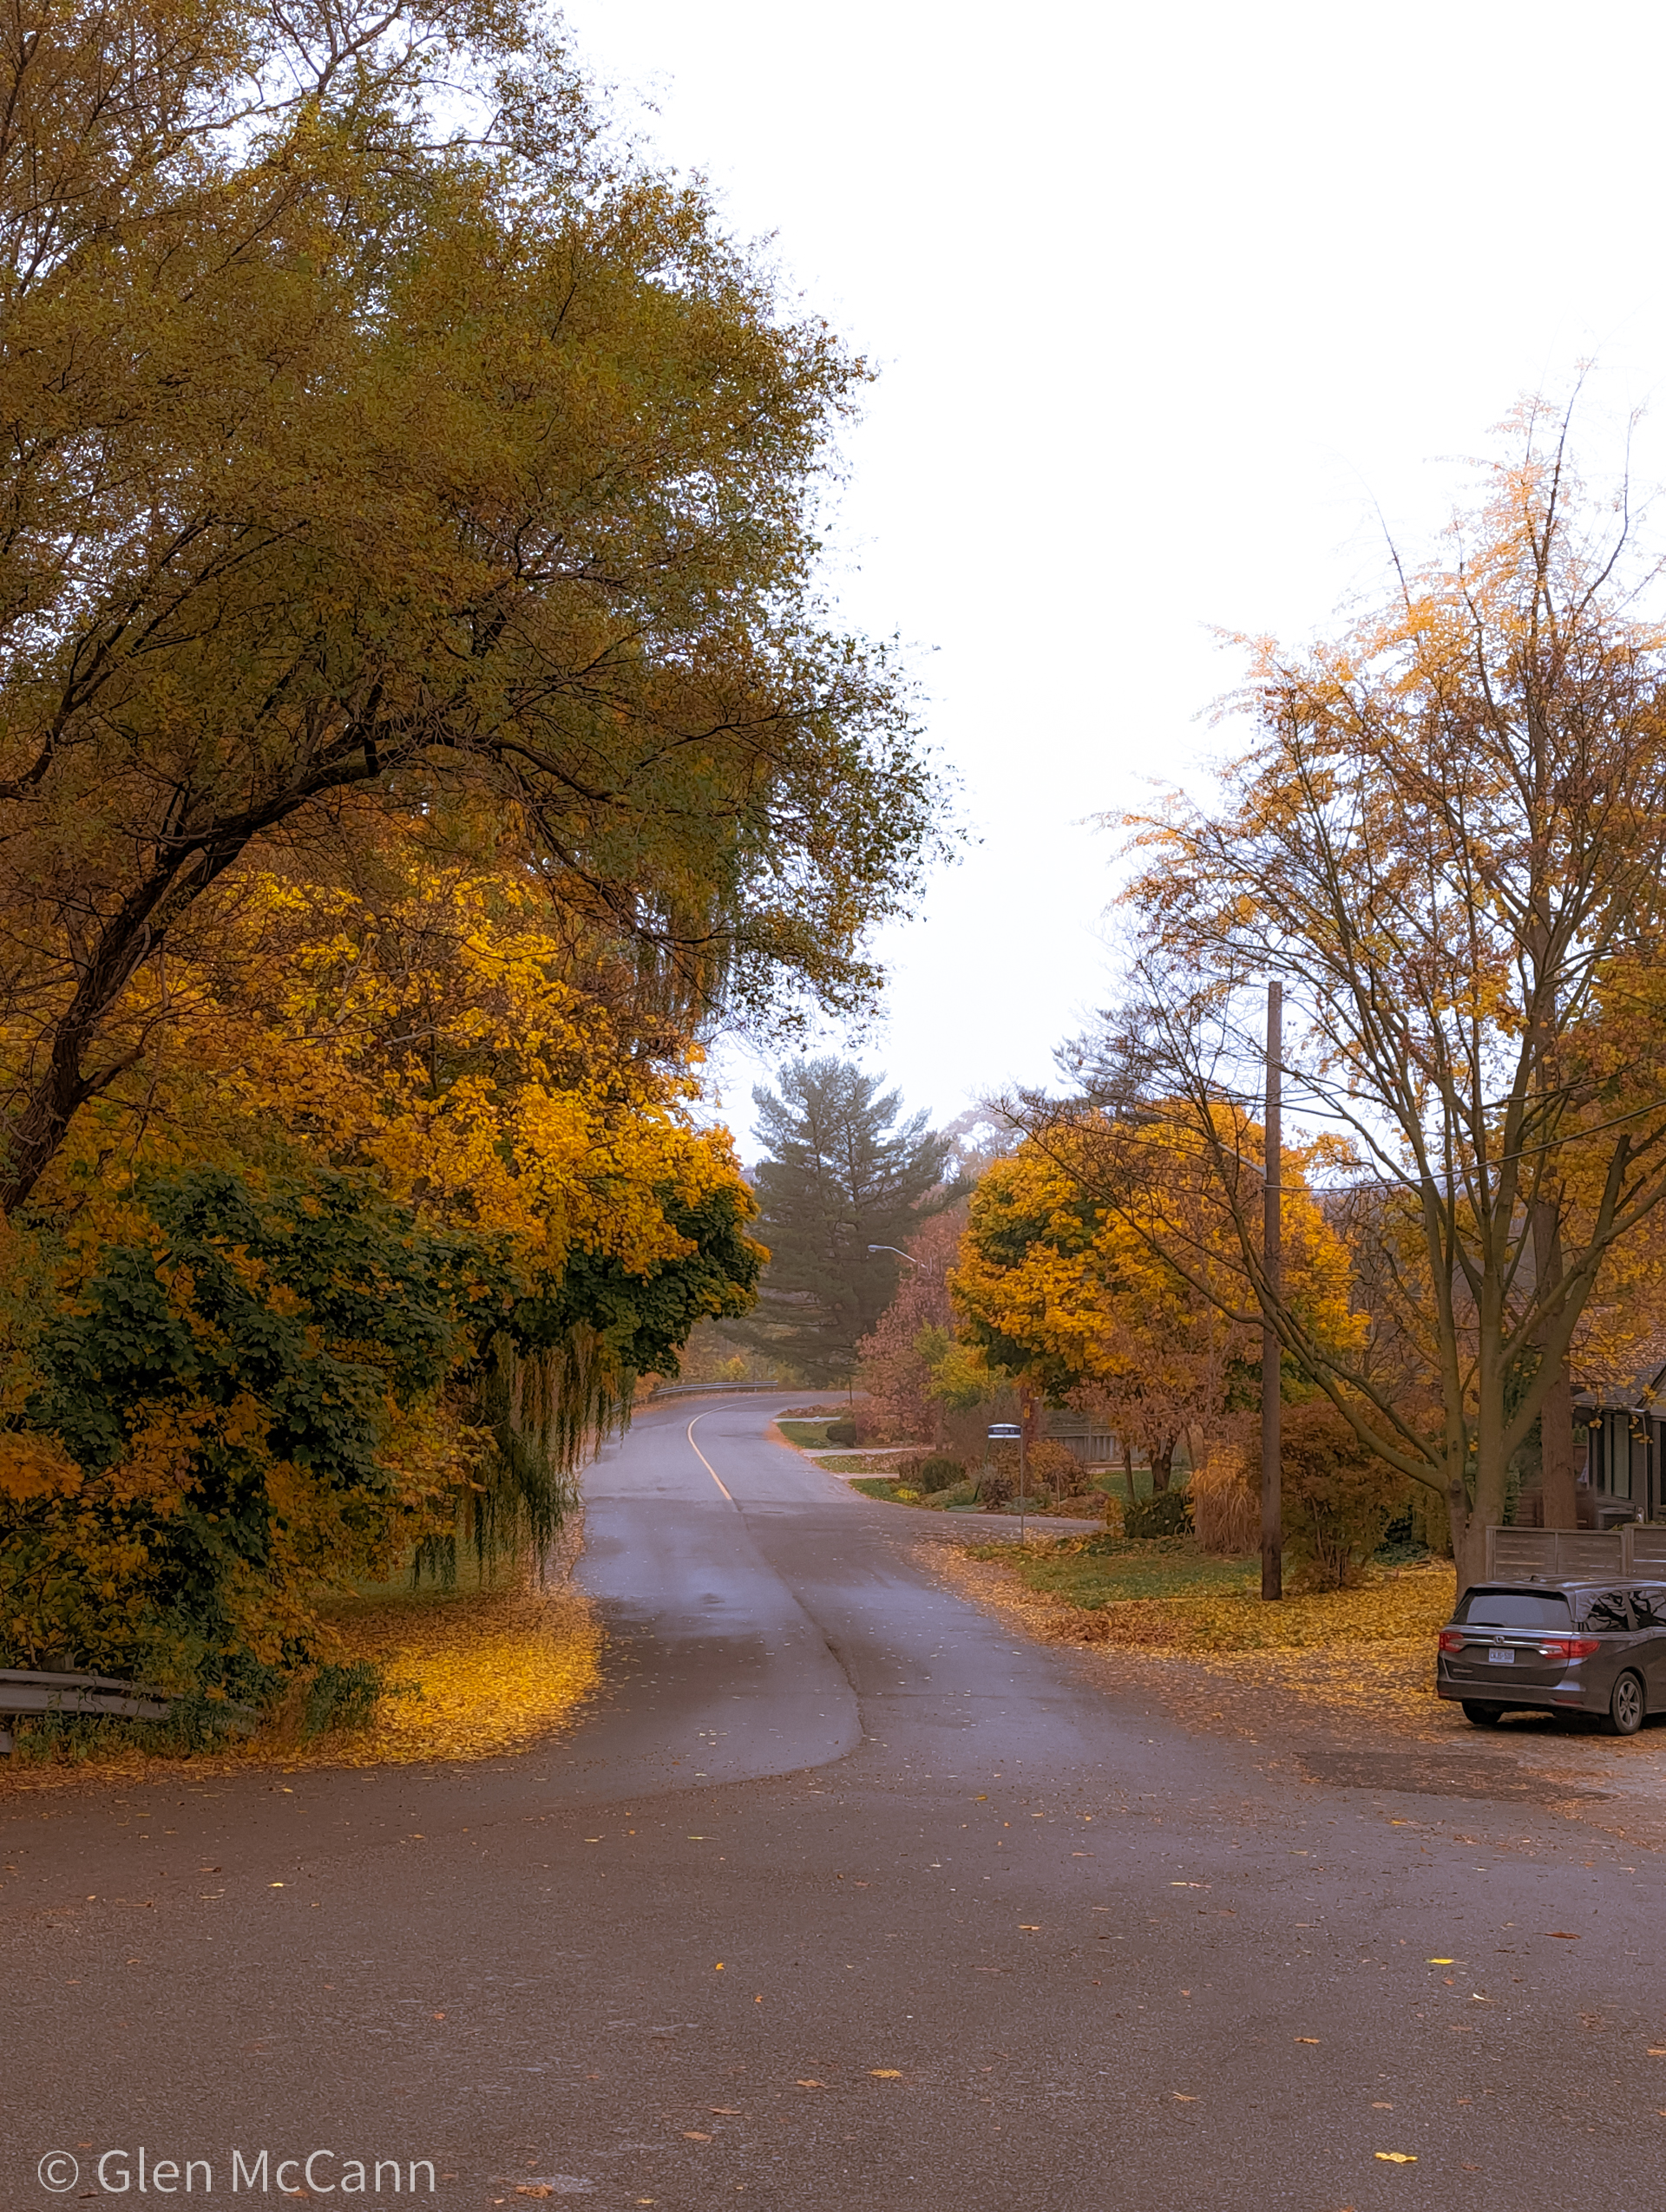 Photo of a wet and foggy street with yellow fall leaves and trees lining the road.